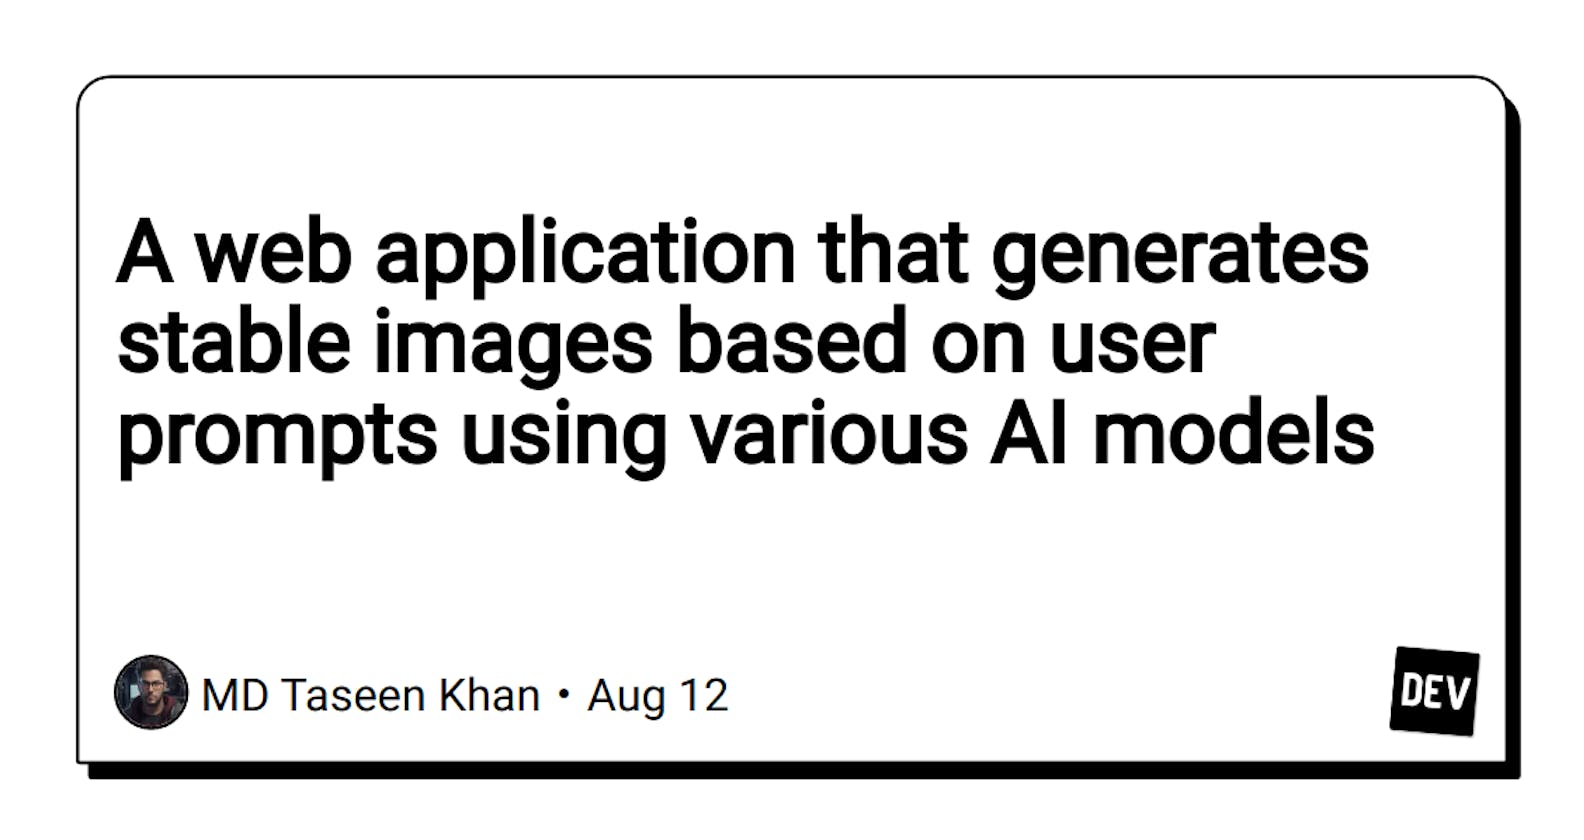 A web application that generates stable images based on user prompts using various AI models